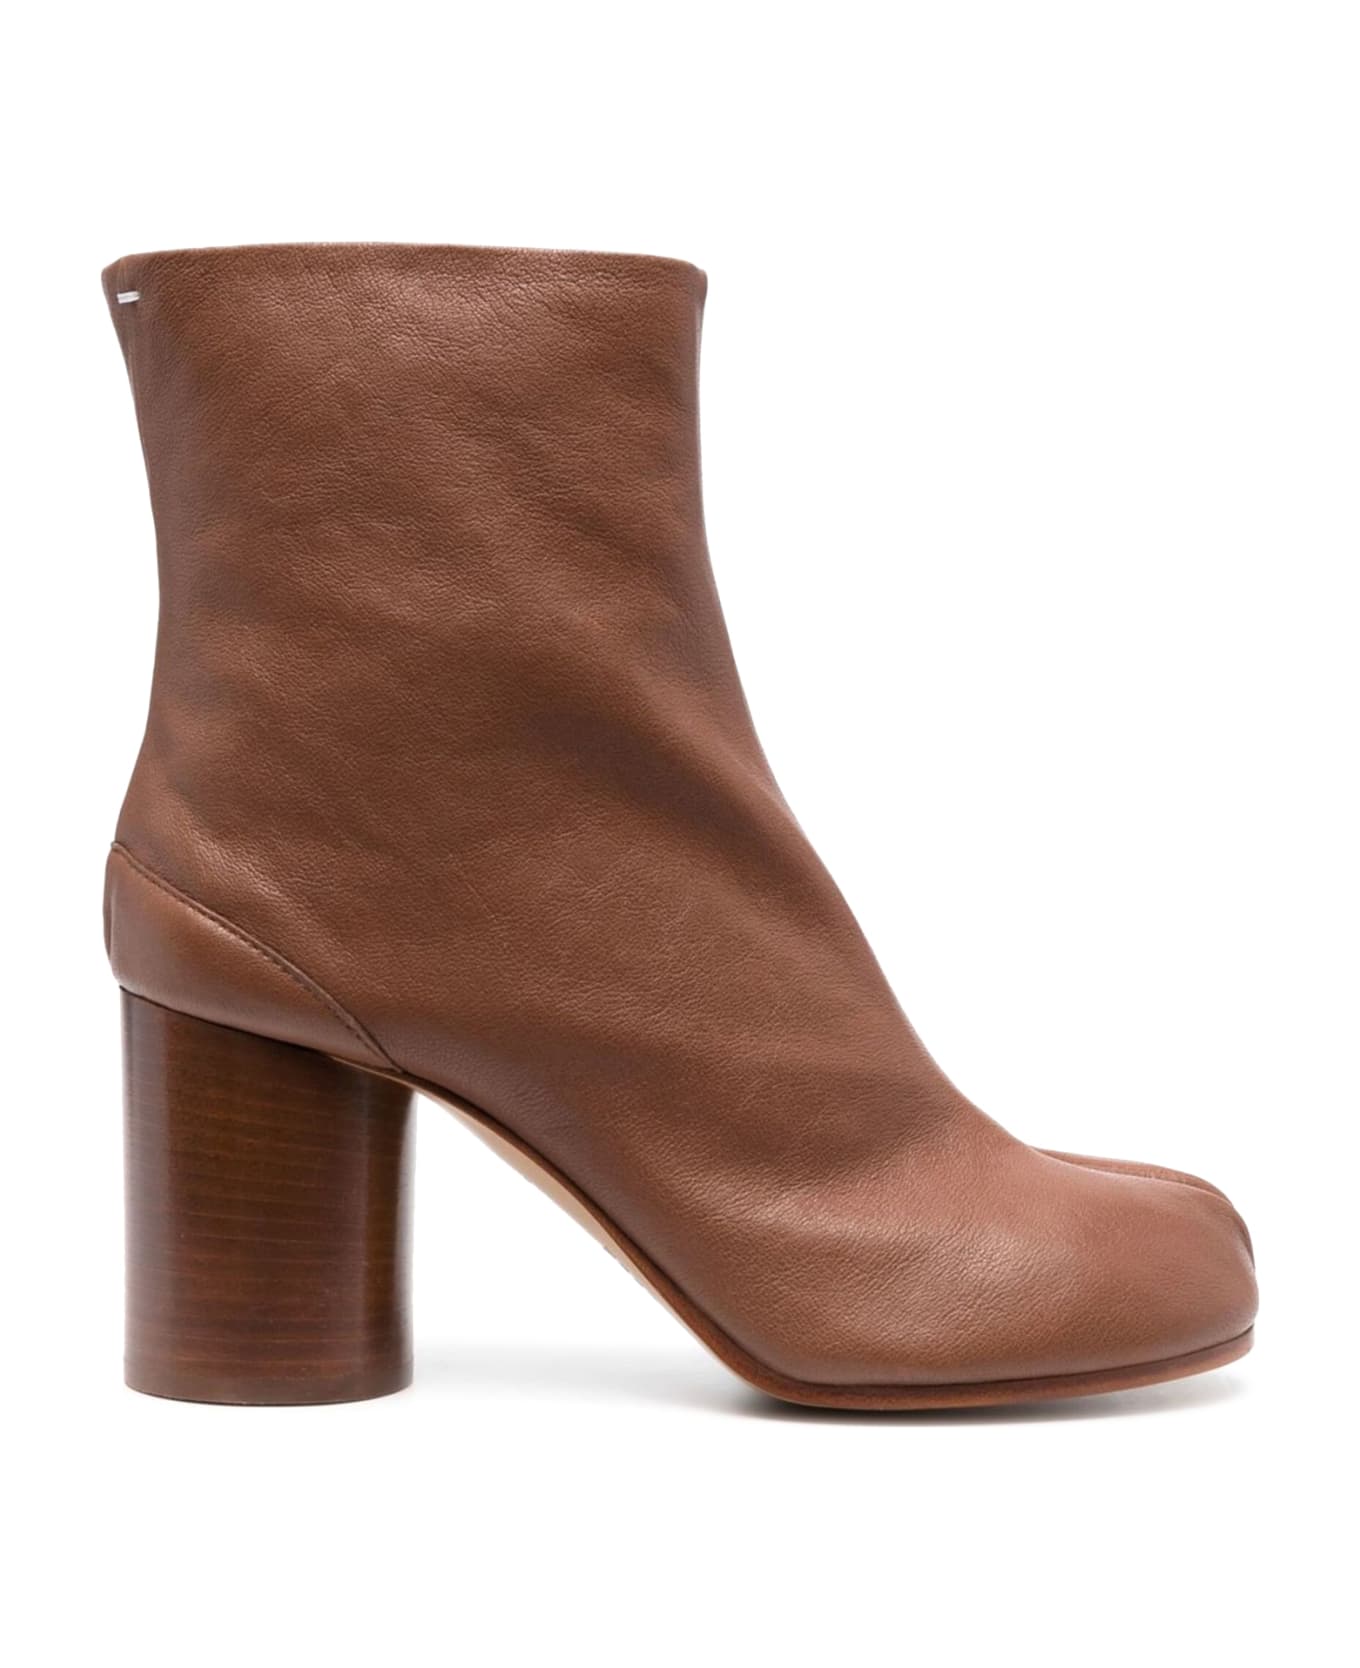 Maison Margiela Tabi Ankle Boots H80 - Tobacco Brown